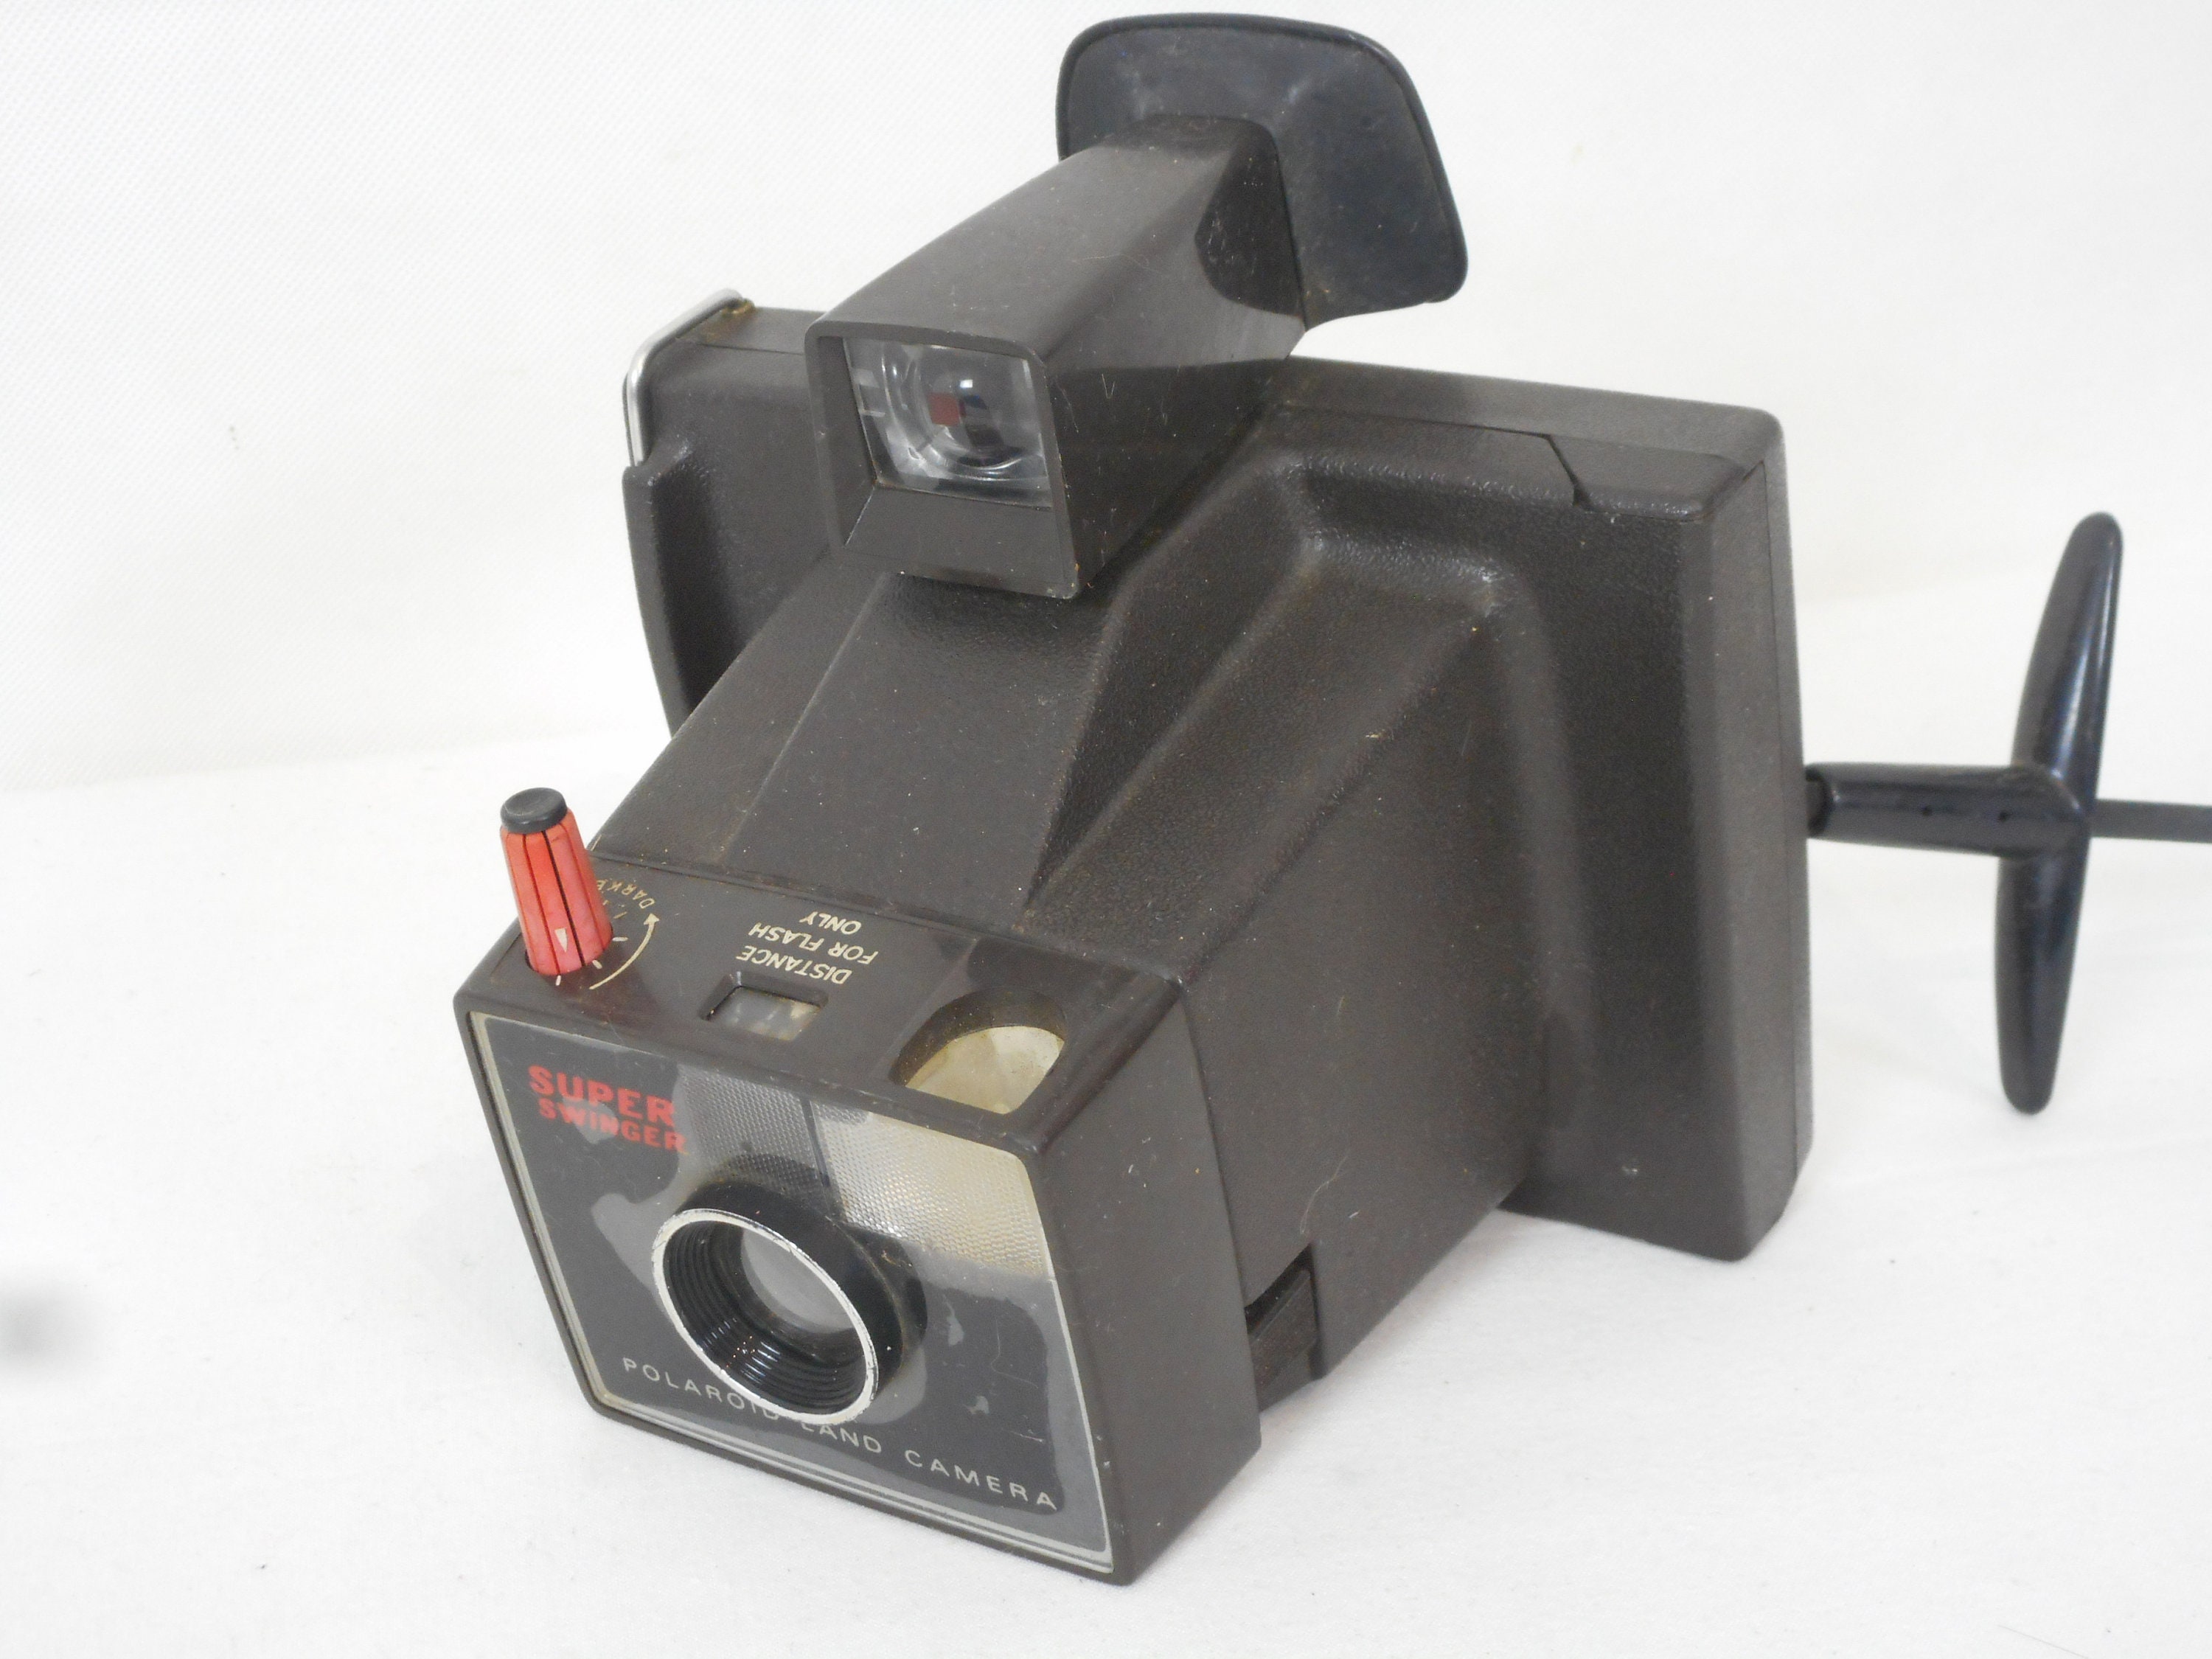 Buy A Stunning Vintage Super Swinger Polaroid Camera in Perfect Online in India photo